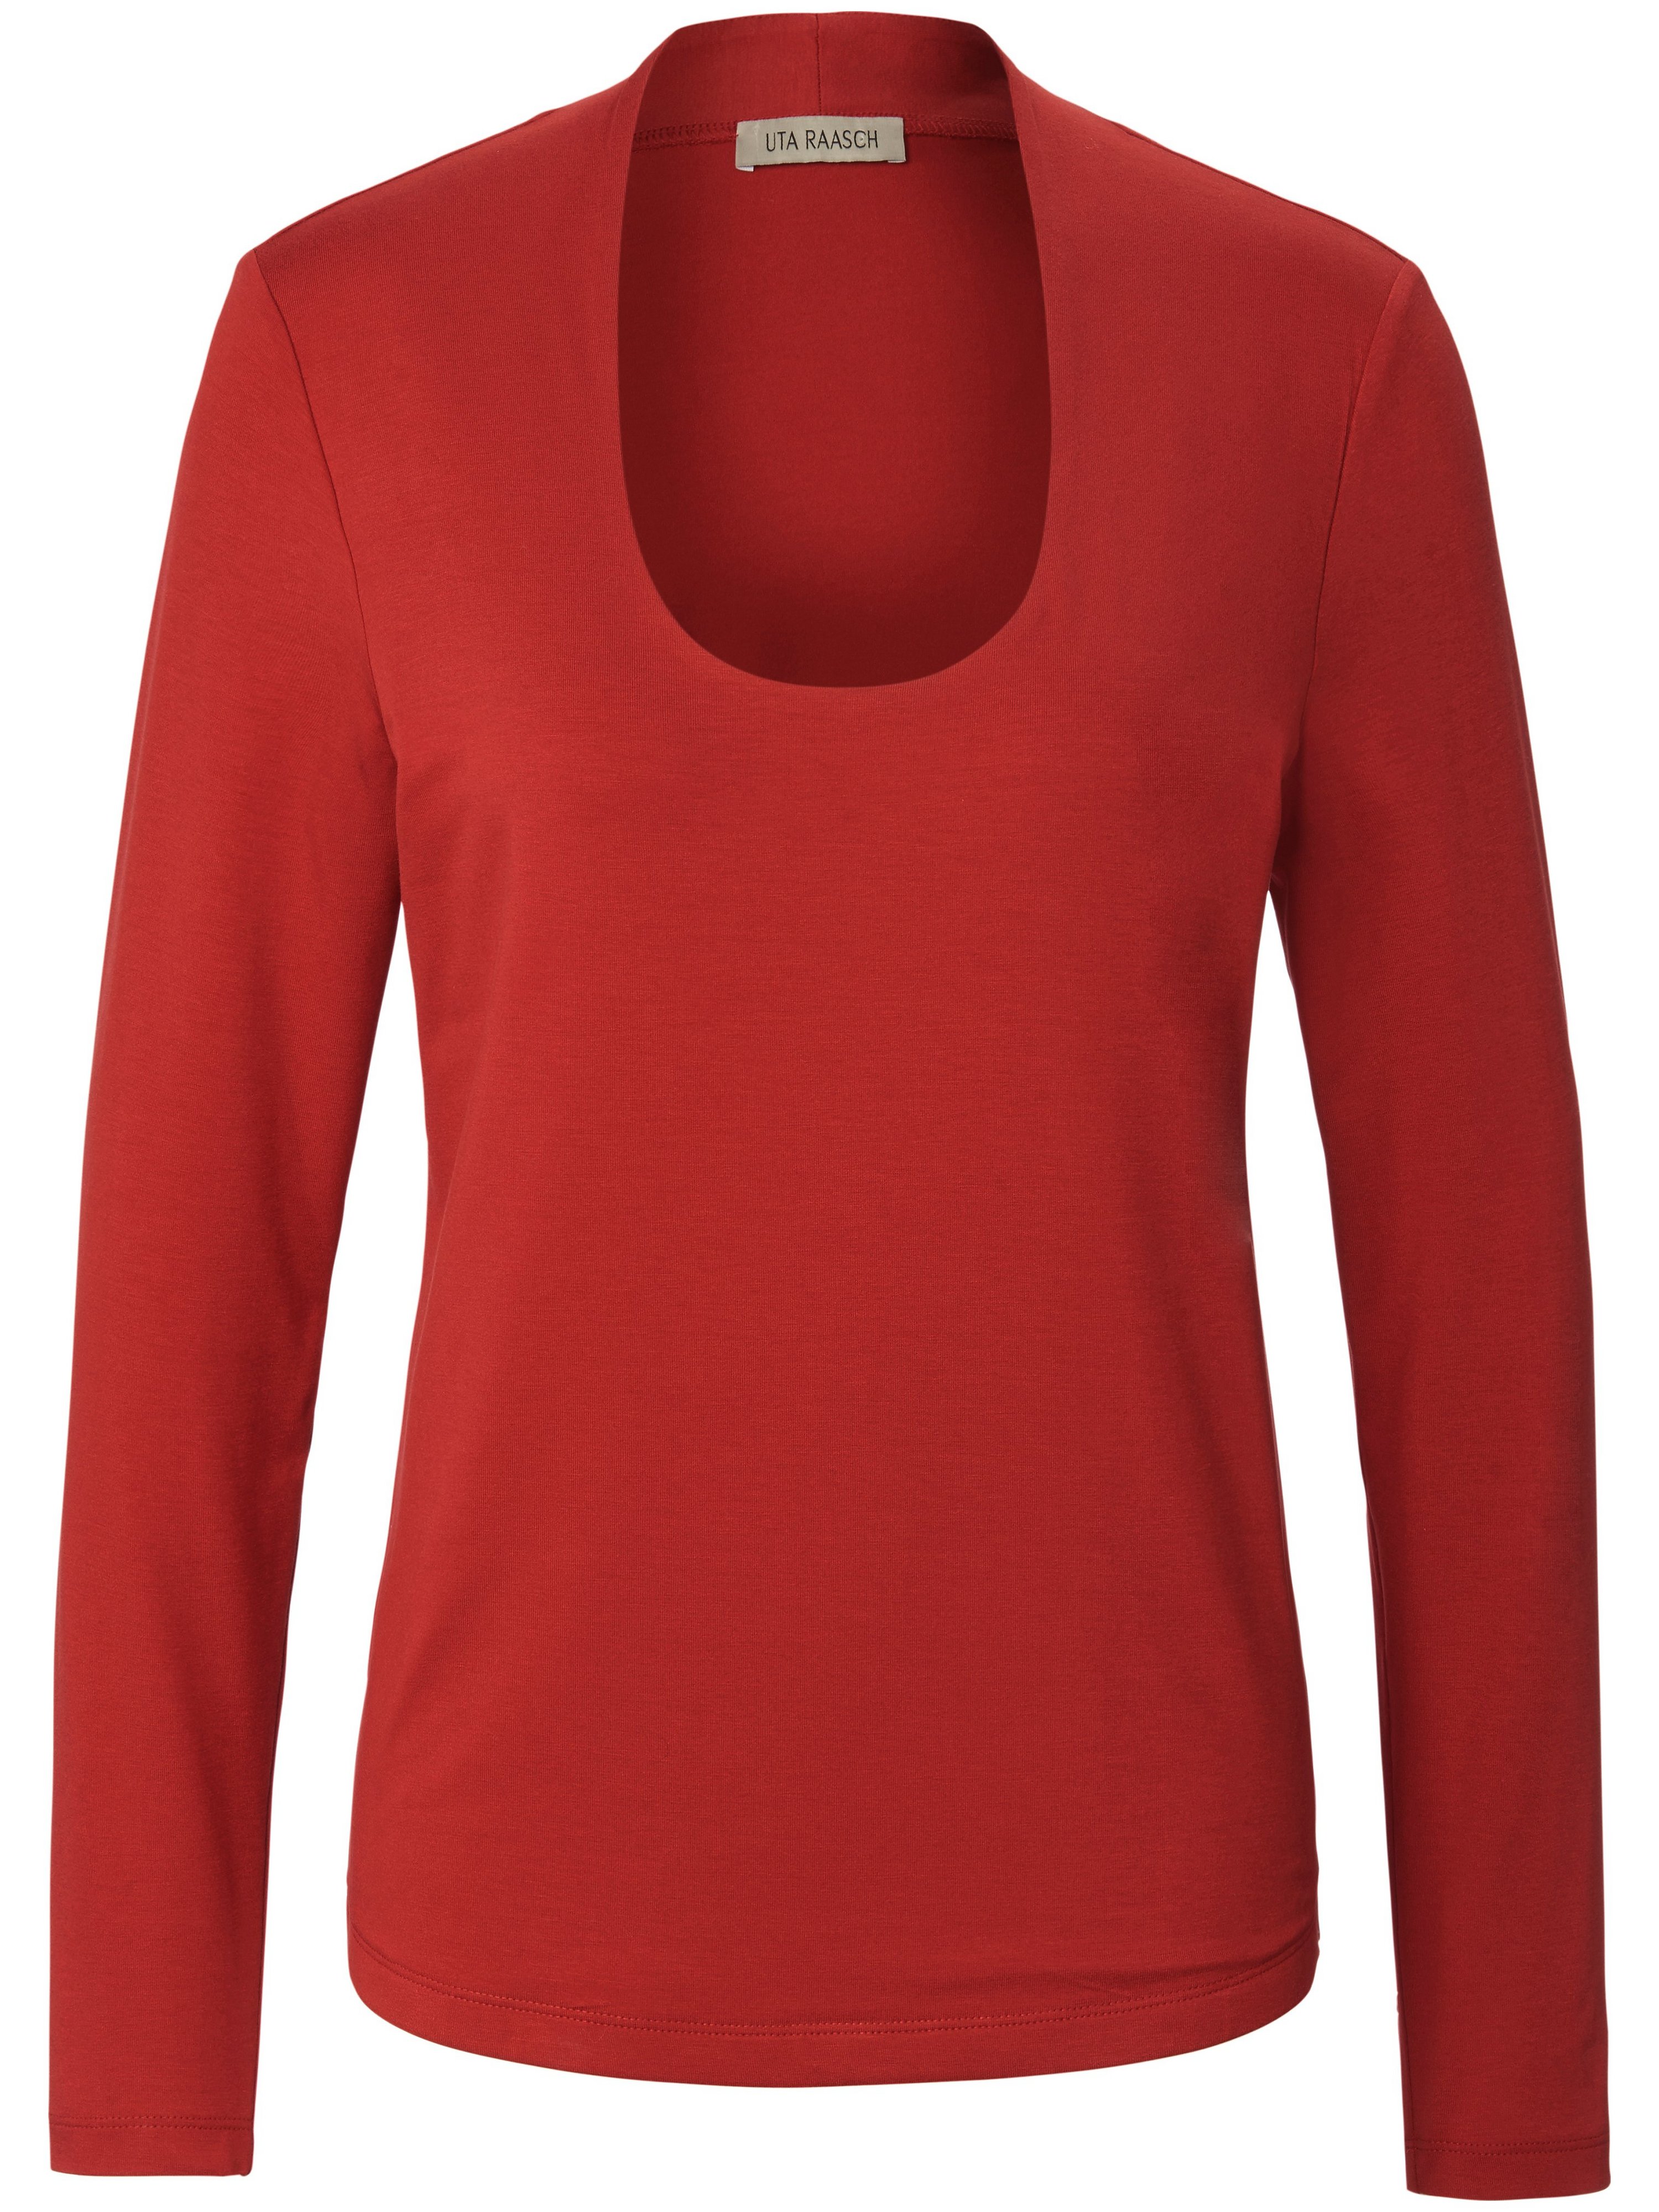 Le T-shirt manches longues  Uta Raasch rouge taille 50